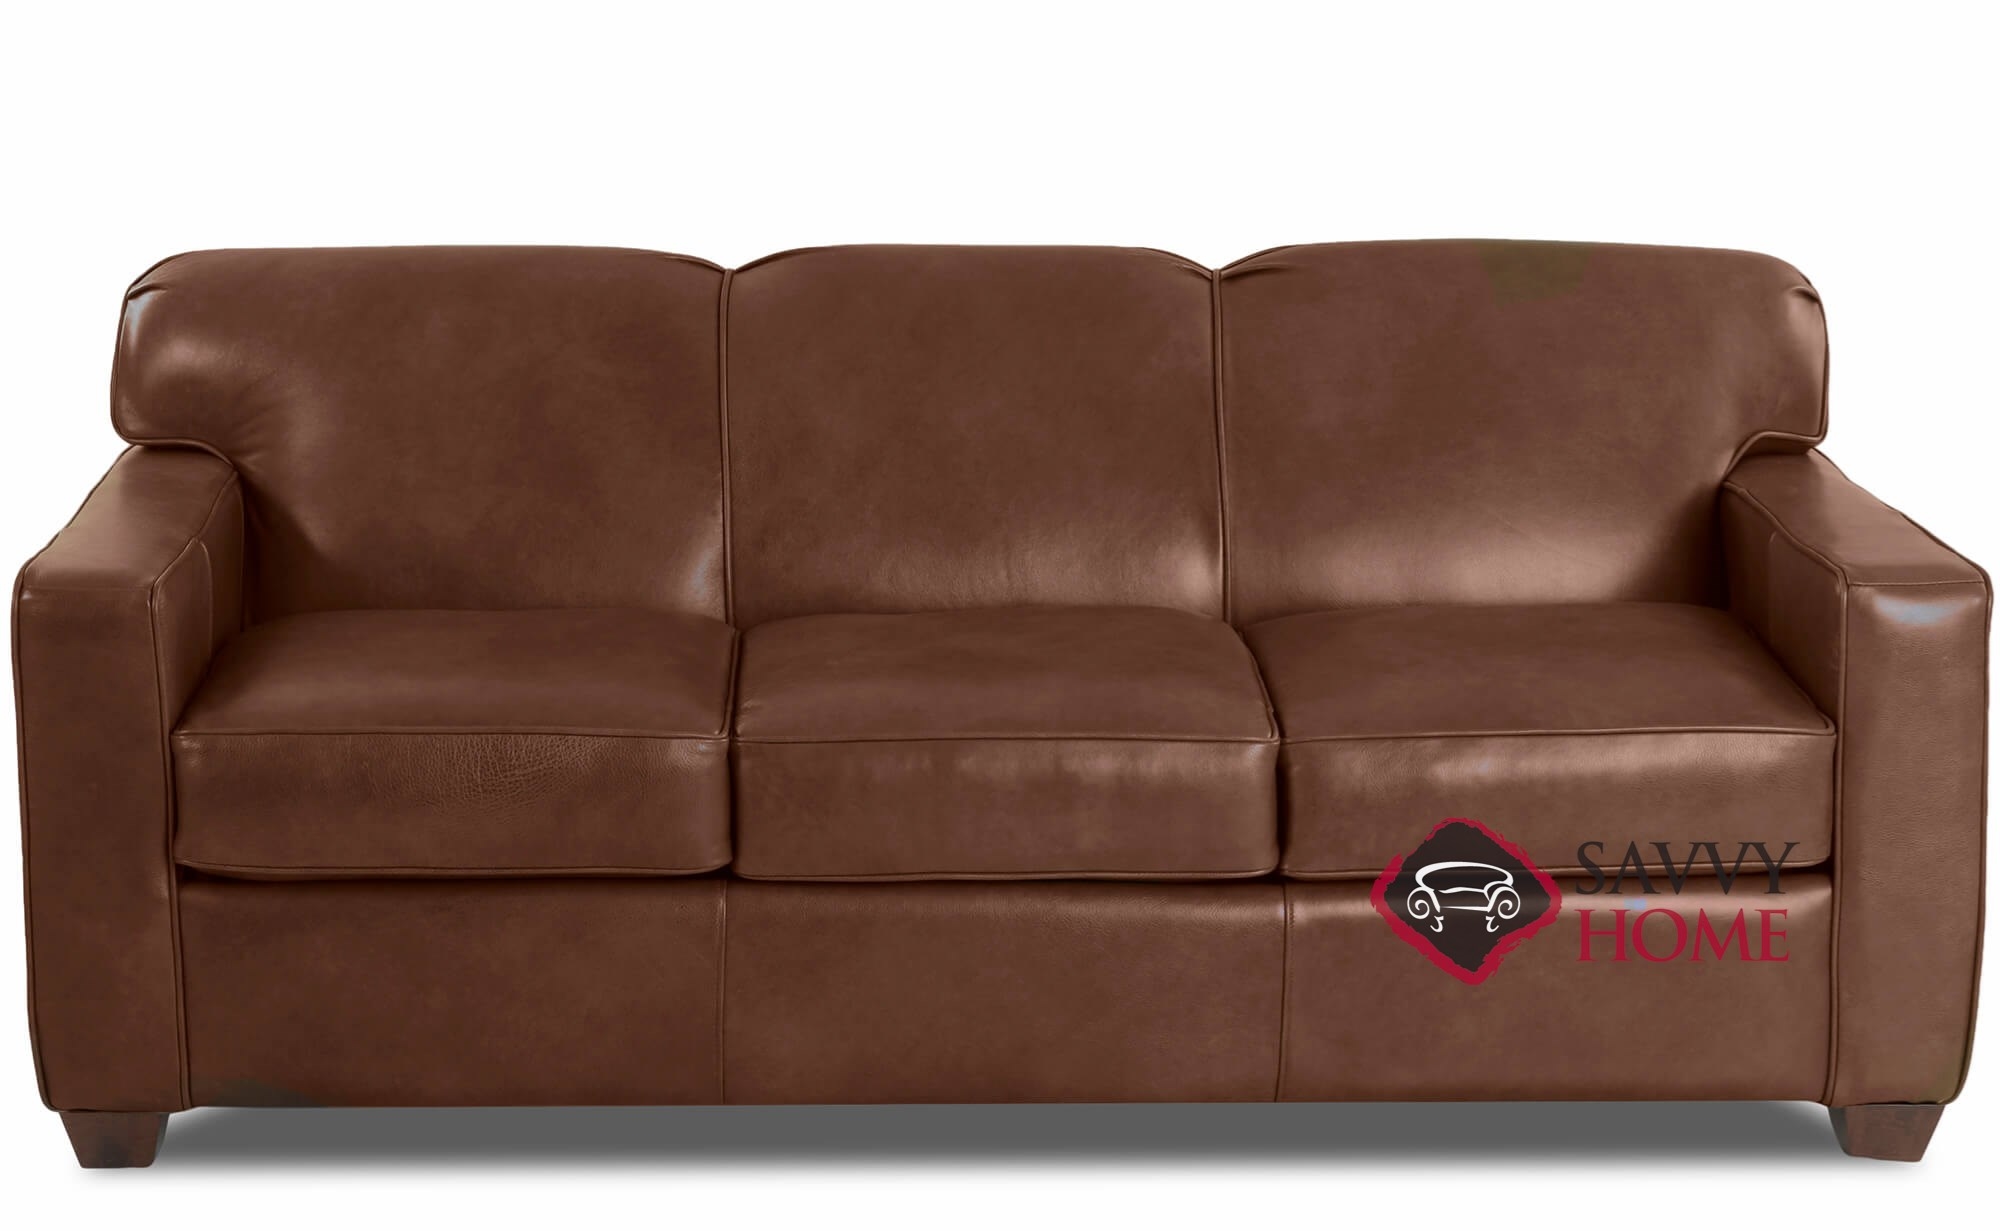 Quick-Ship Geneva Leather Sleeper Sofas Queen in Bronx Sod by Savvy